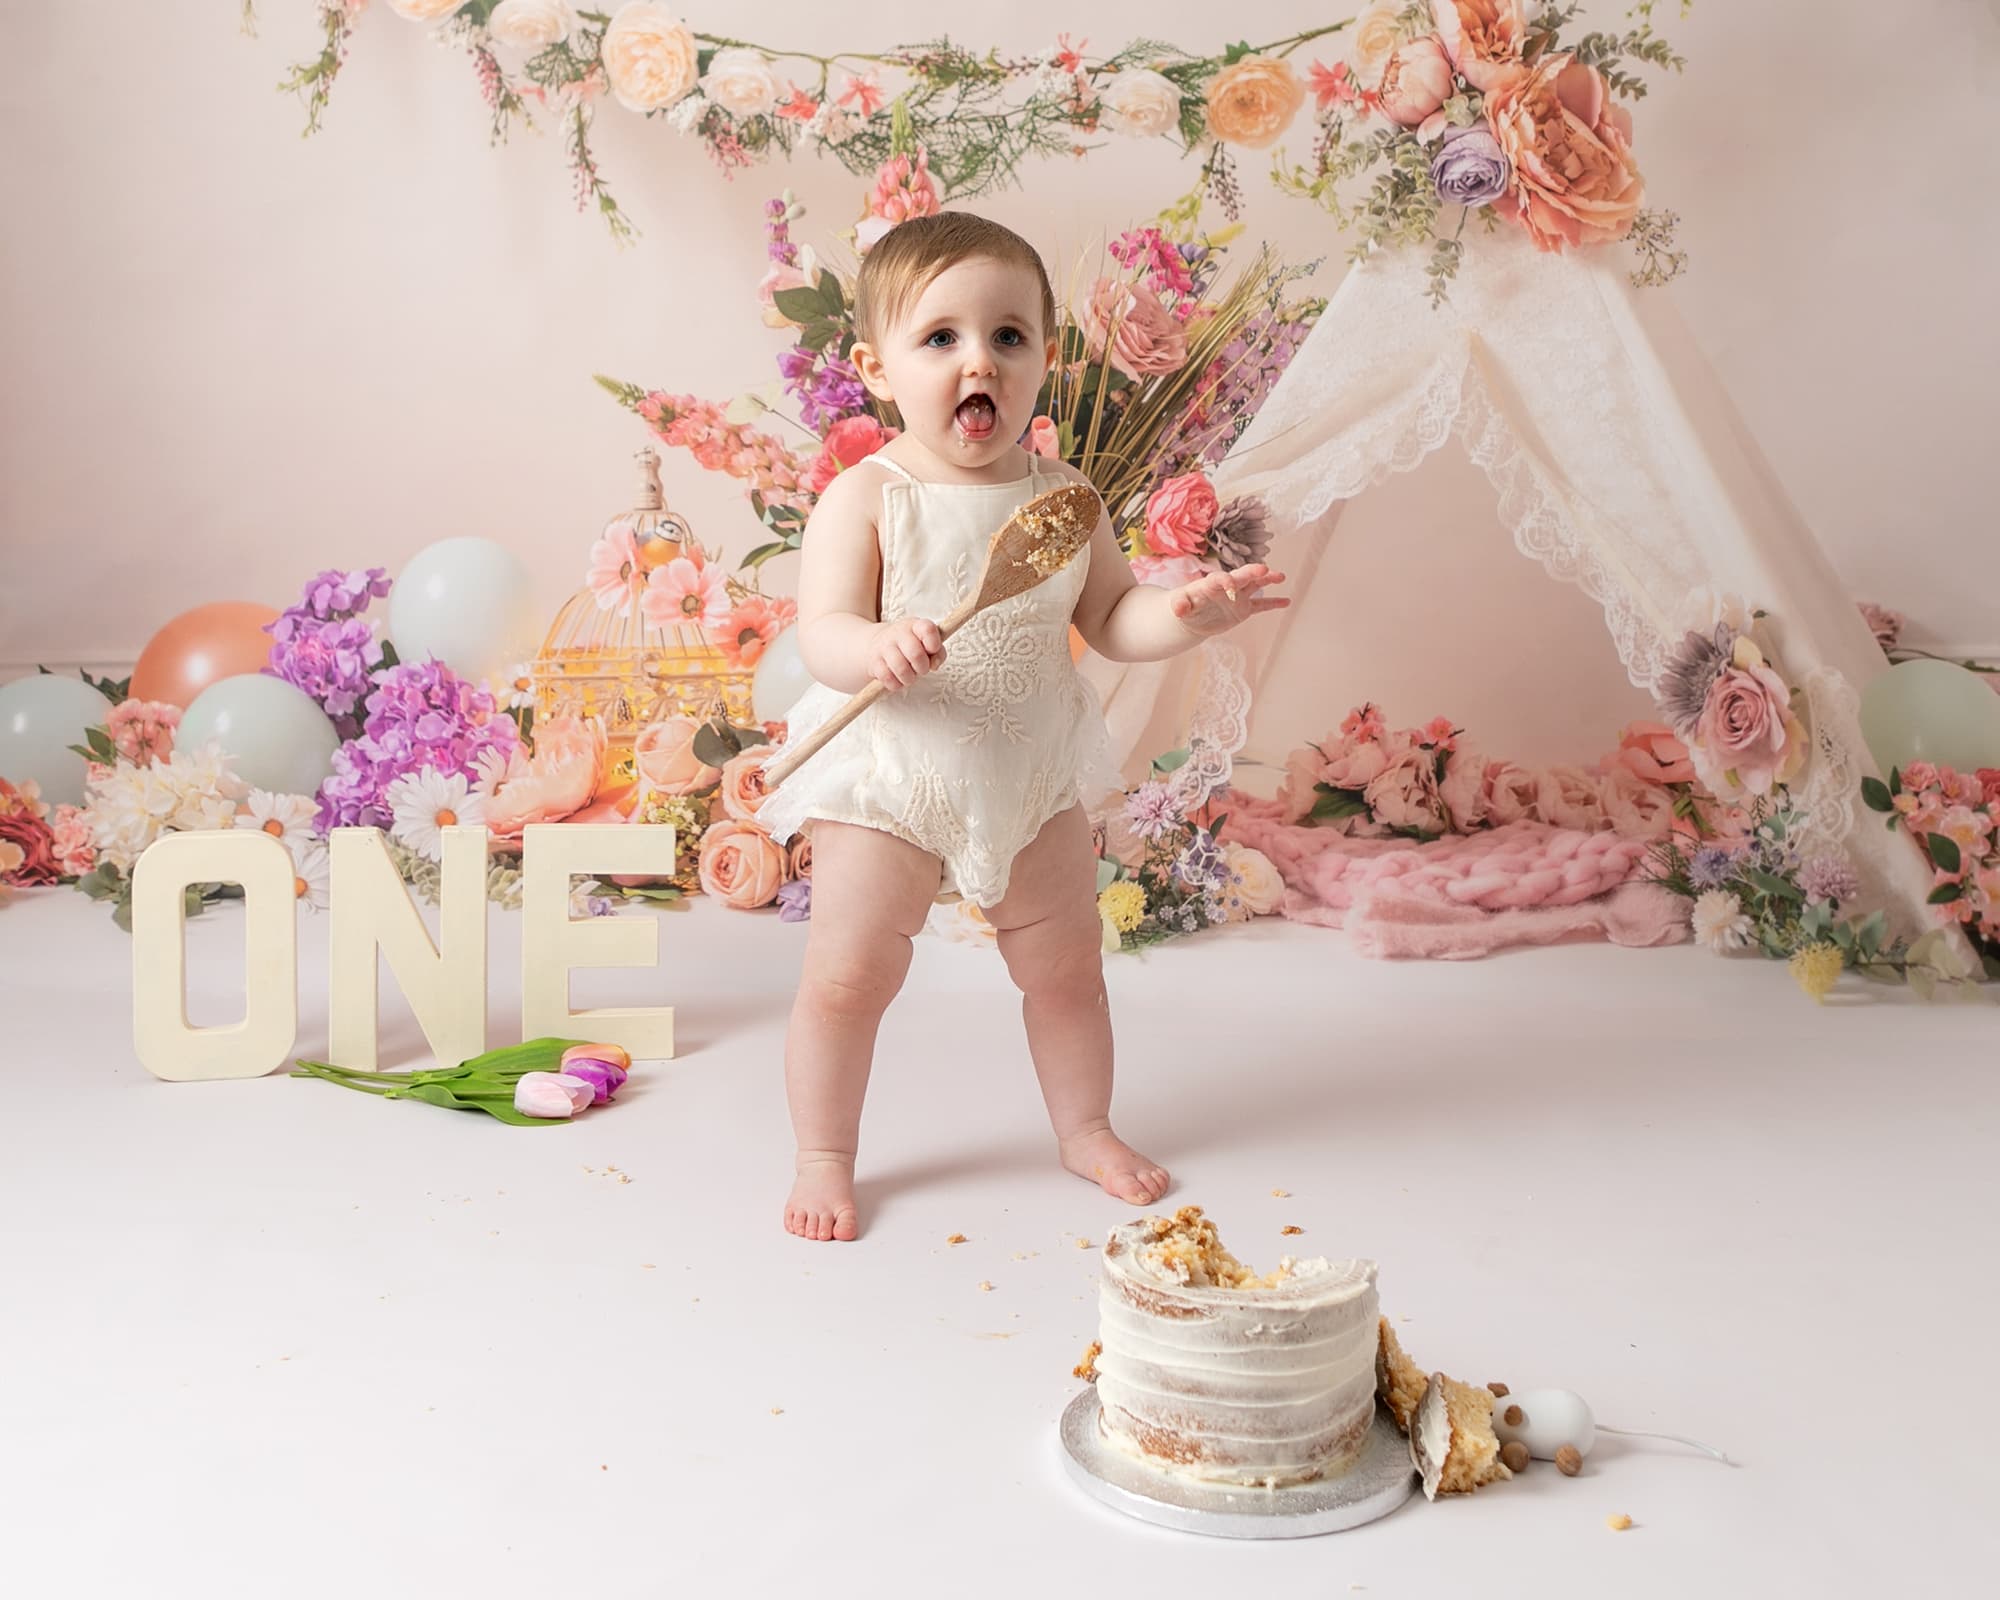 baby girl standing up holding a wooden spoon, wearing a cream frilly romper. Baby is at her 1st birthday photoshoot in Glasgow. Floral background in pink & peach tones with a teepee